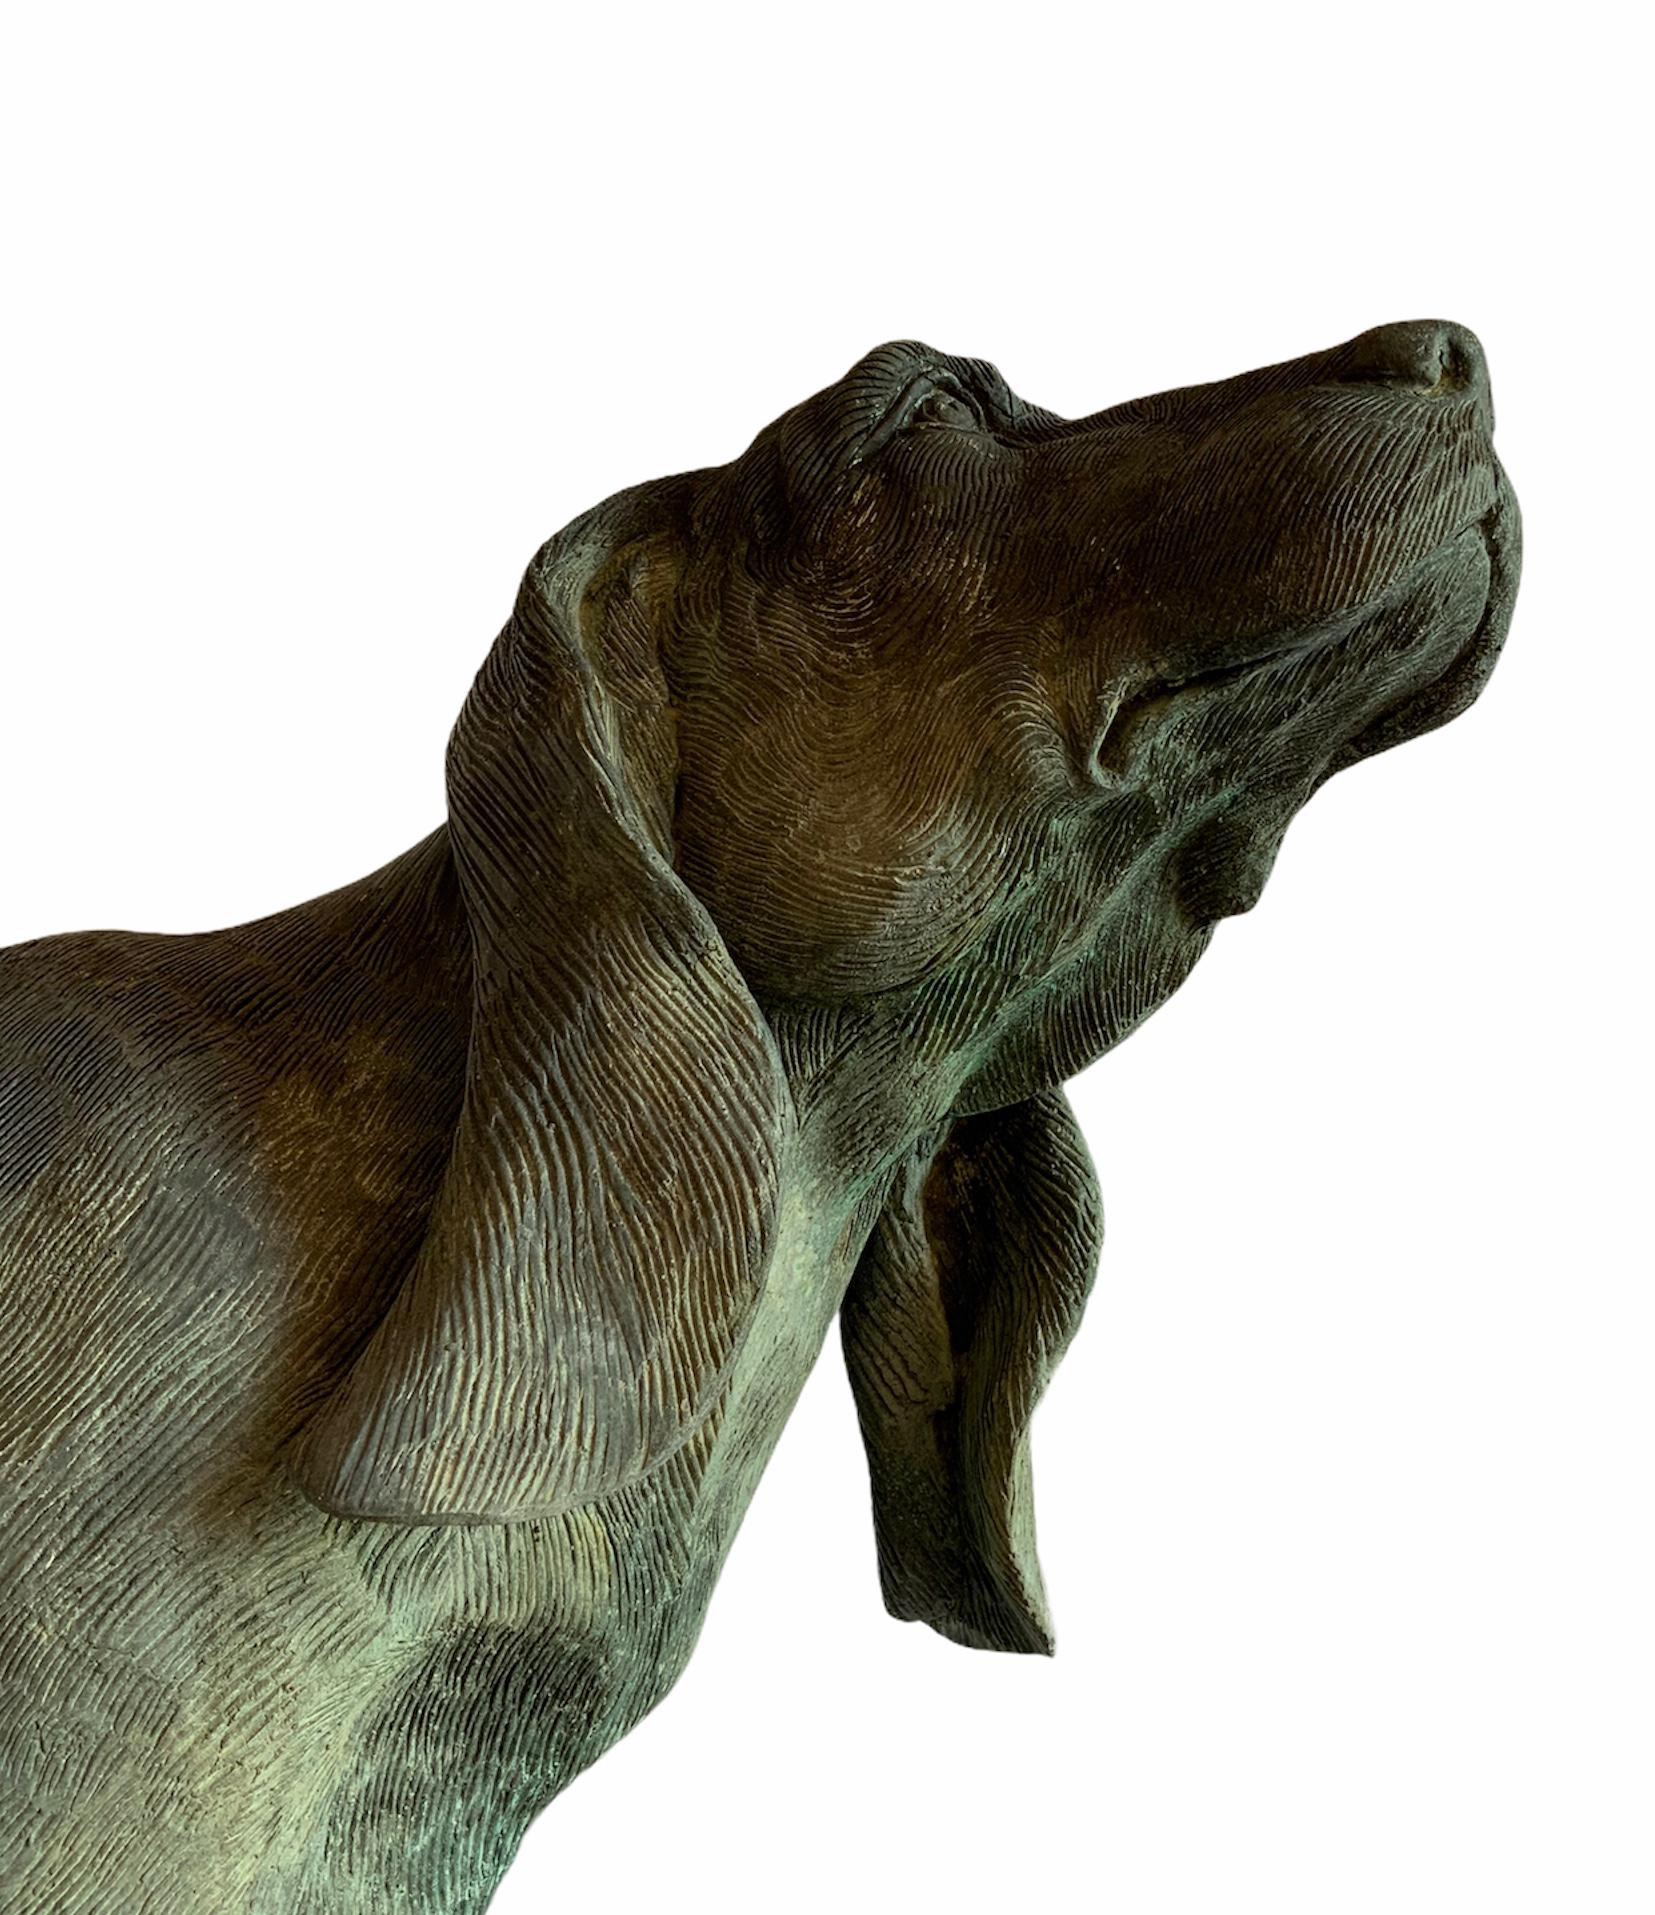 This is an almost real life size heavy patinated bronze of possible Braco Italiano or Black Tan Coonhound dog fountain sculpture with elevated leg or dog peeing position. The details of each part of its body are very noticeable including its long